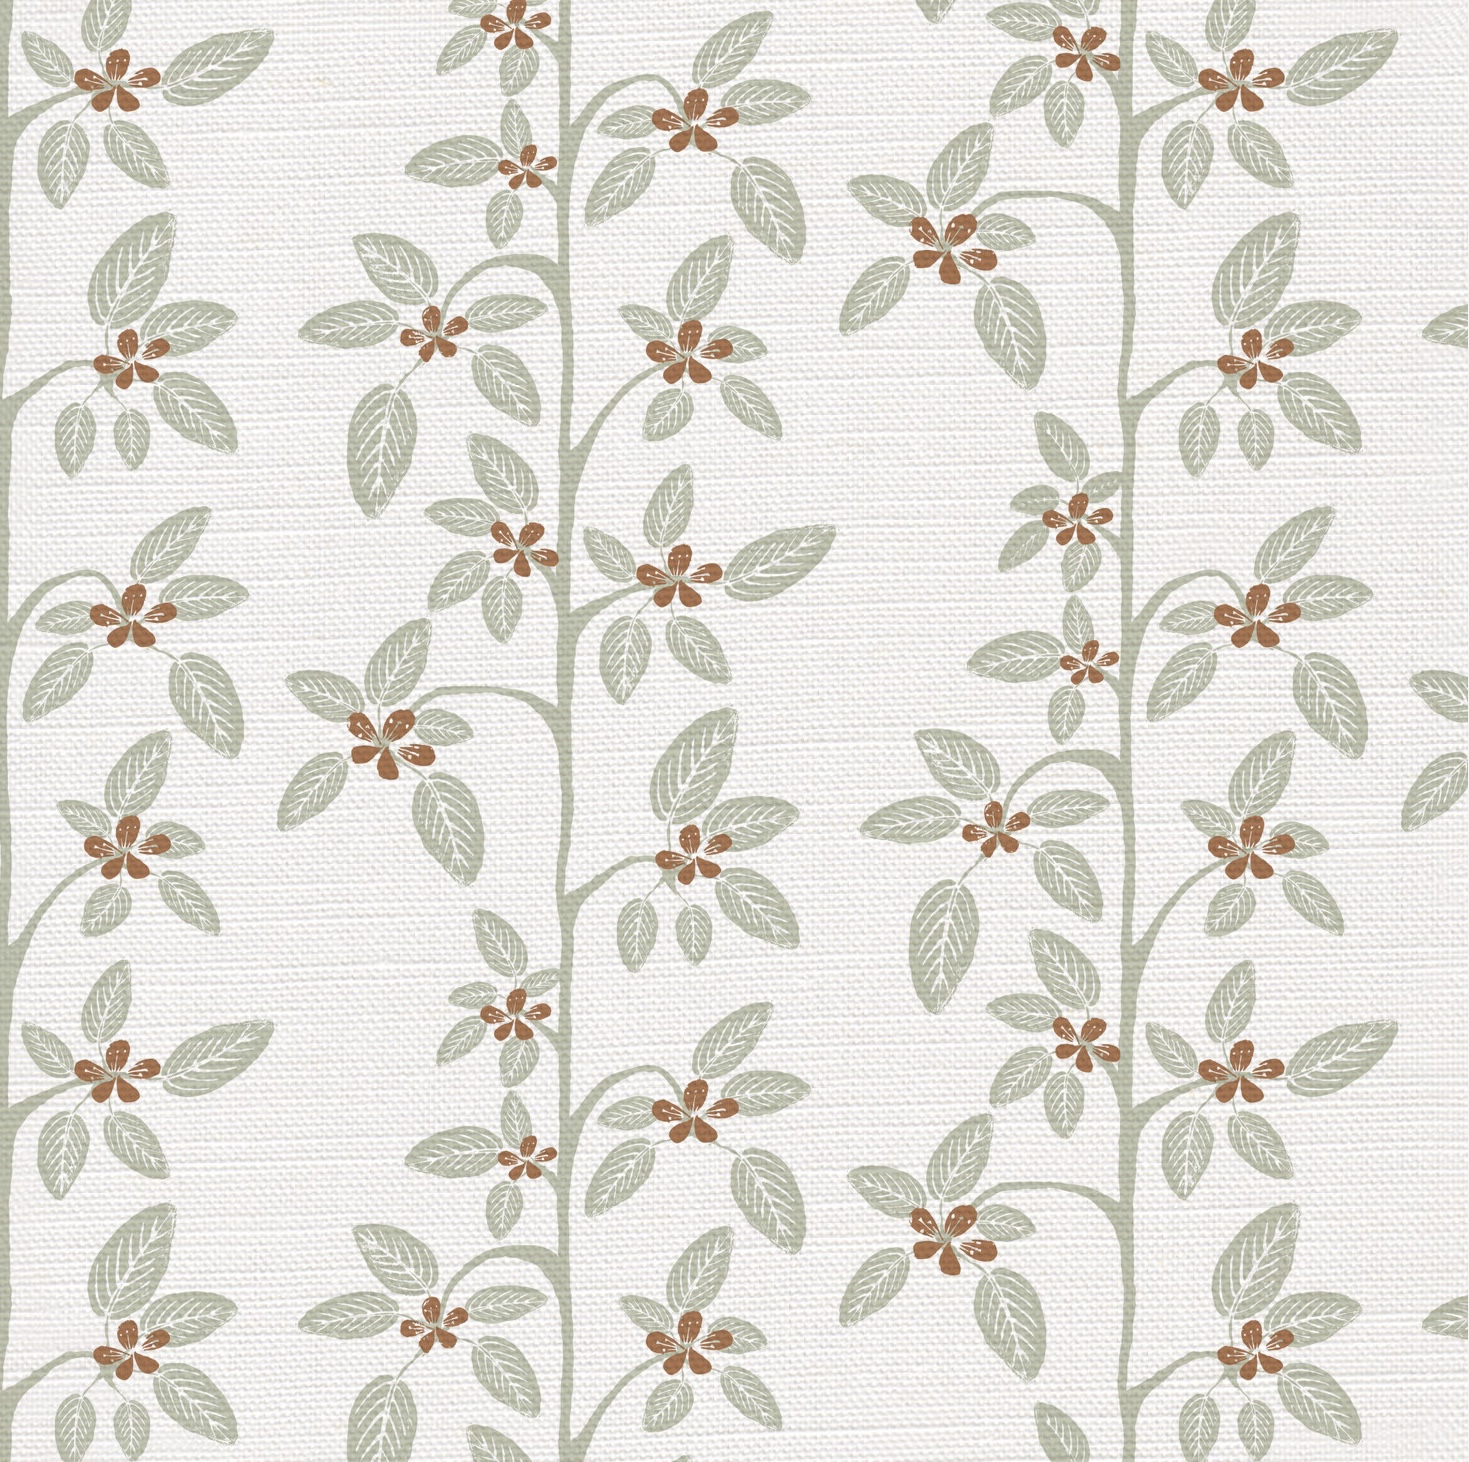 Petite Apple Blossom Fabric in Amber on a White Background